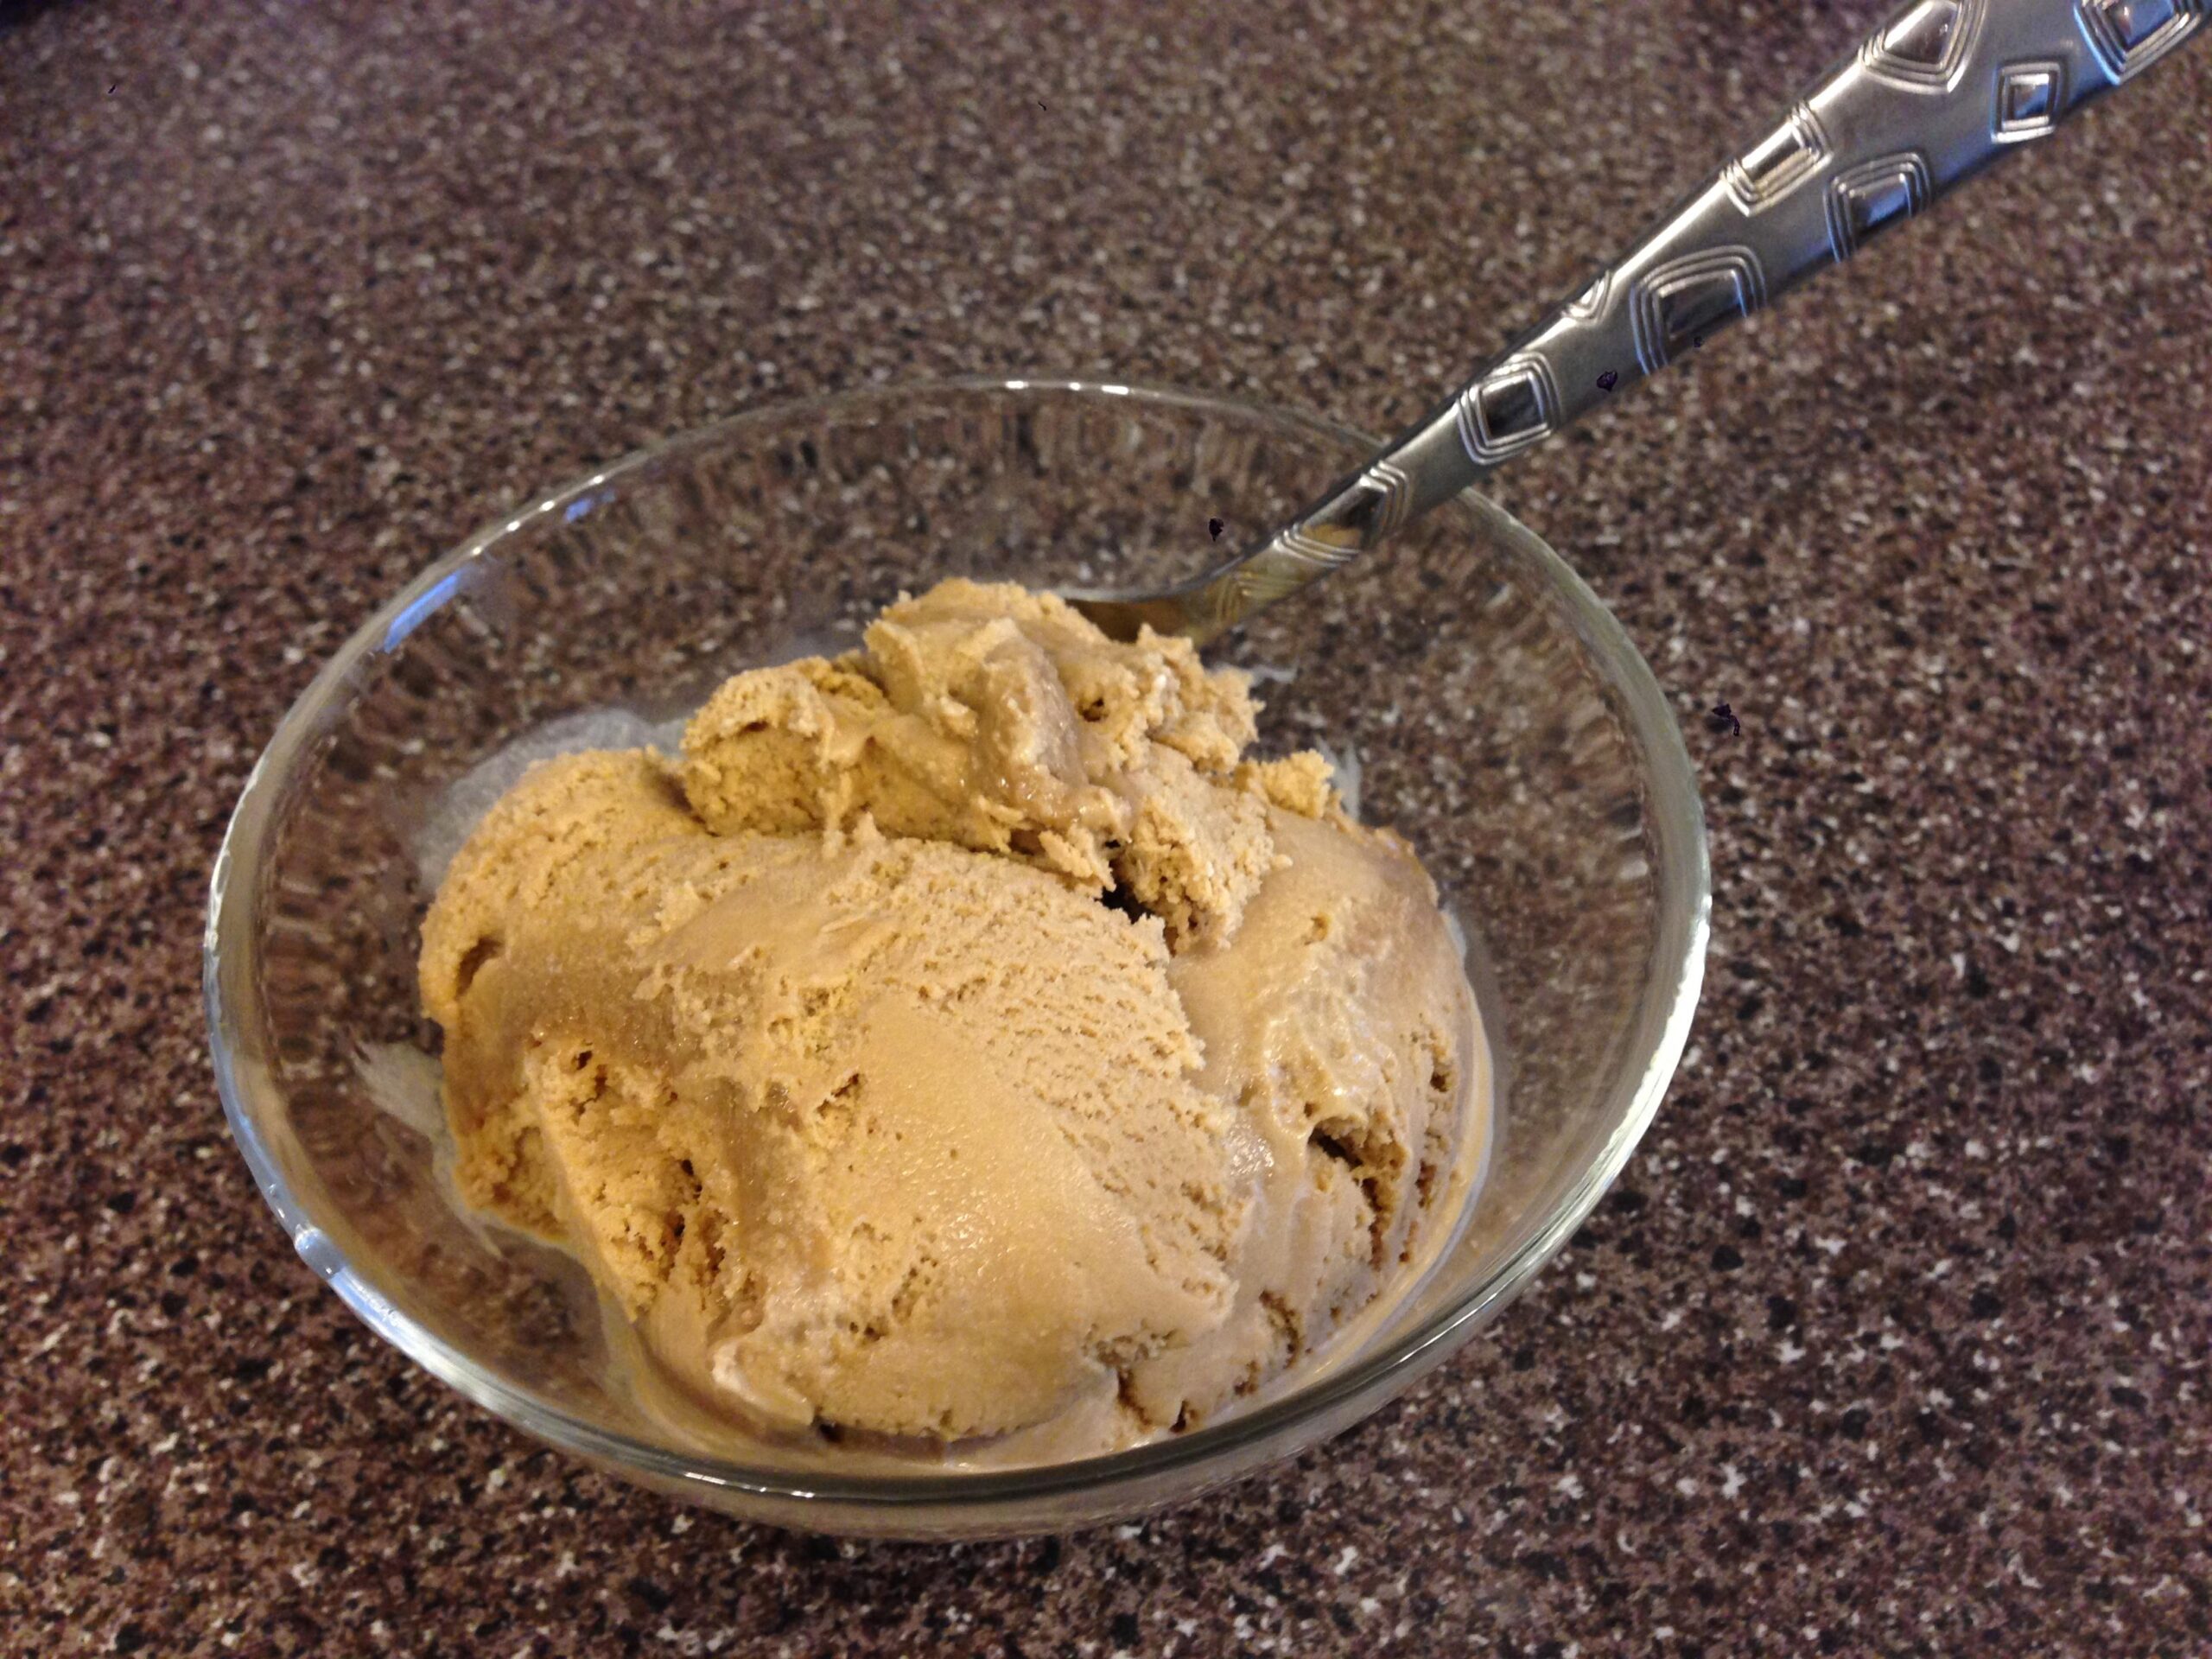  Enjoy a scoop of smooth and creamy coffee ice cream on a hot summer day!